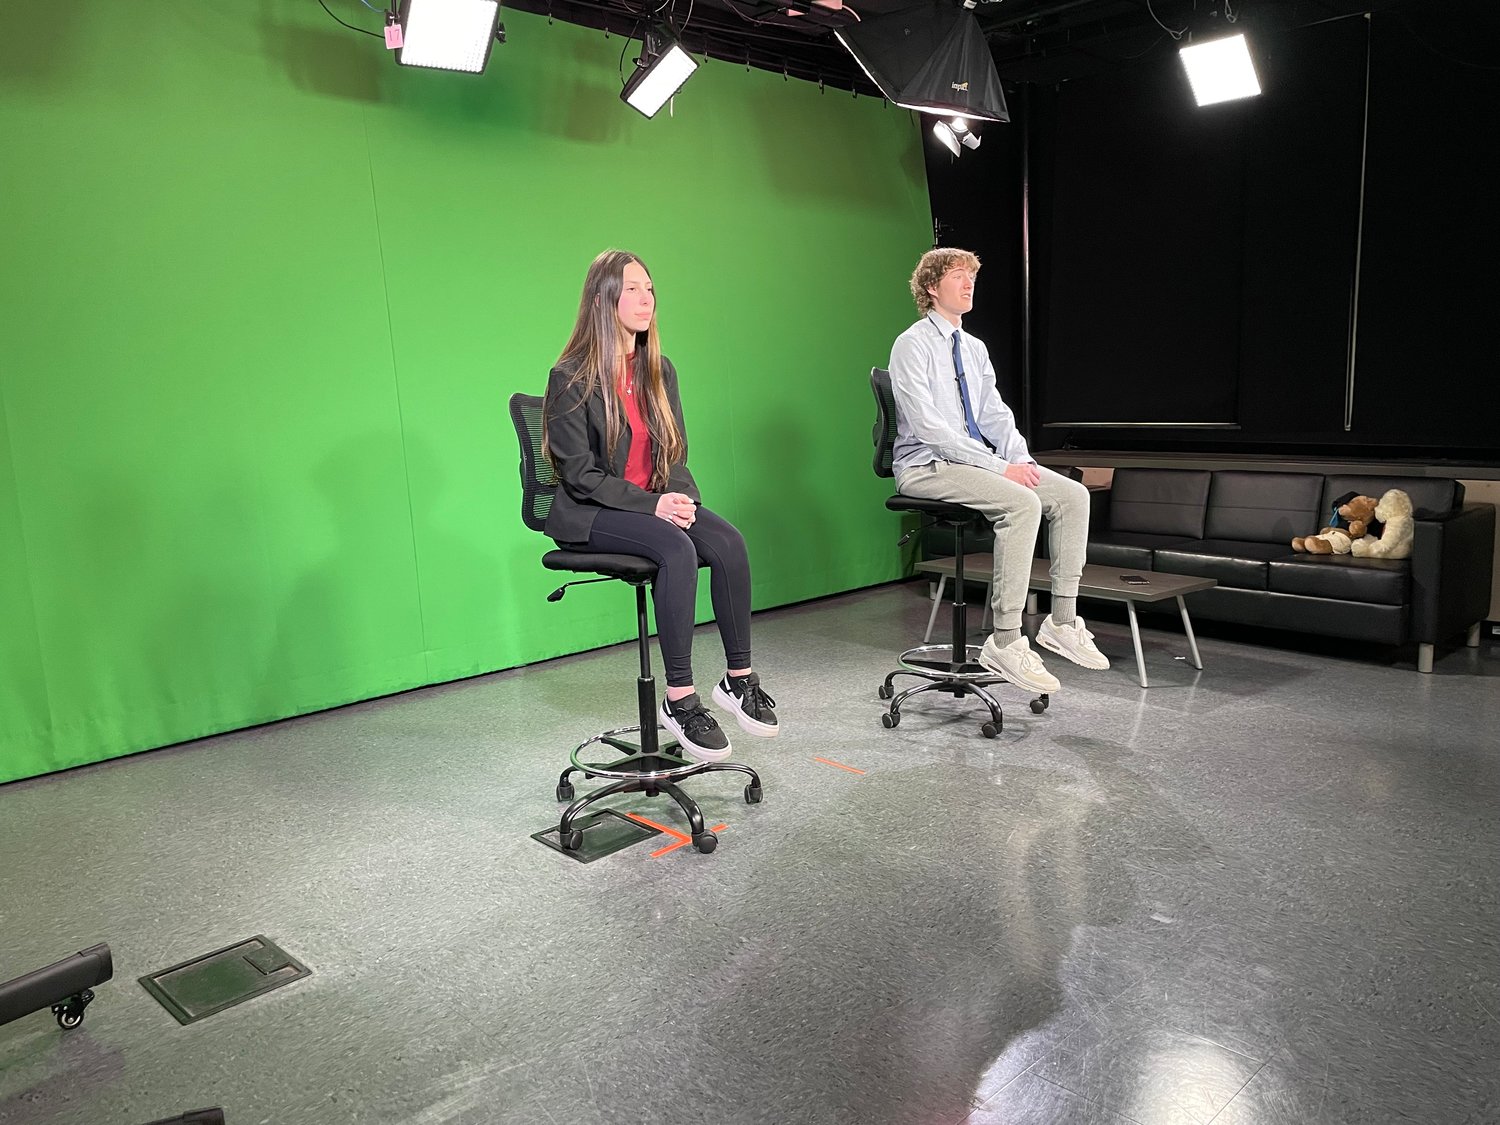 BMB’s classroom is nothing like a normal one: Students work in a fully functioning studio. Juniors Hannah Broxmeyer and Sean McQuillan prepared to anchor BMB’s morning announcements.